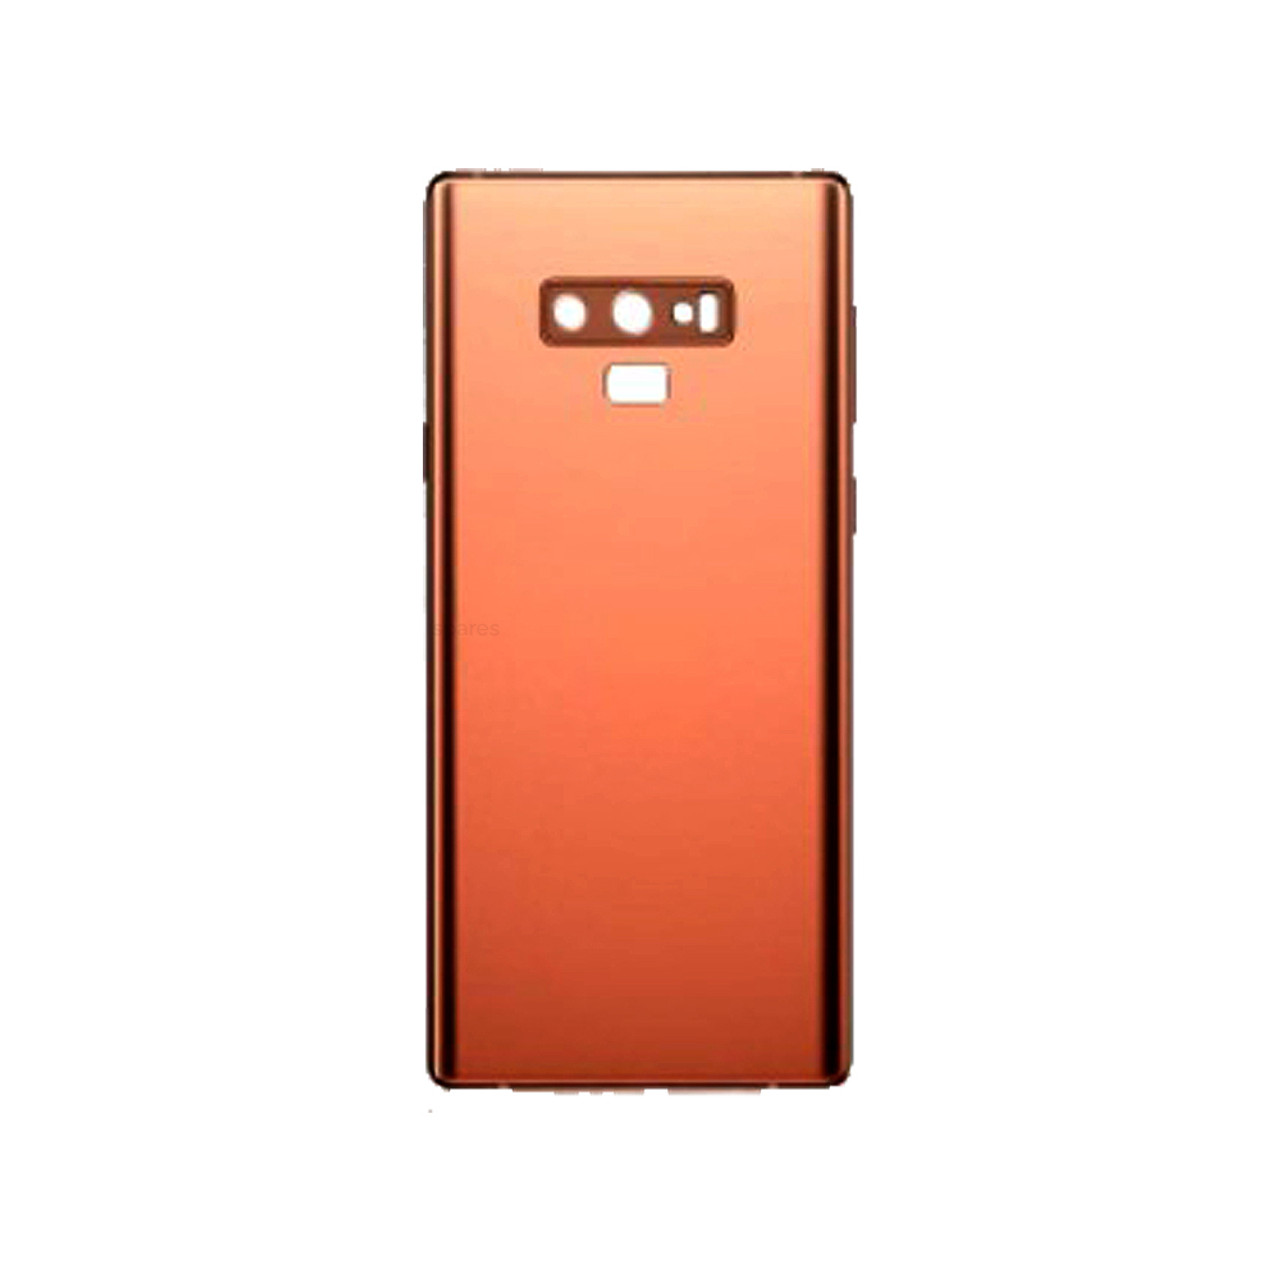 Replacement Back Glass With Lens Galaxy Note 9 SM-N960F Metallic Copper